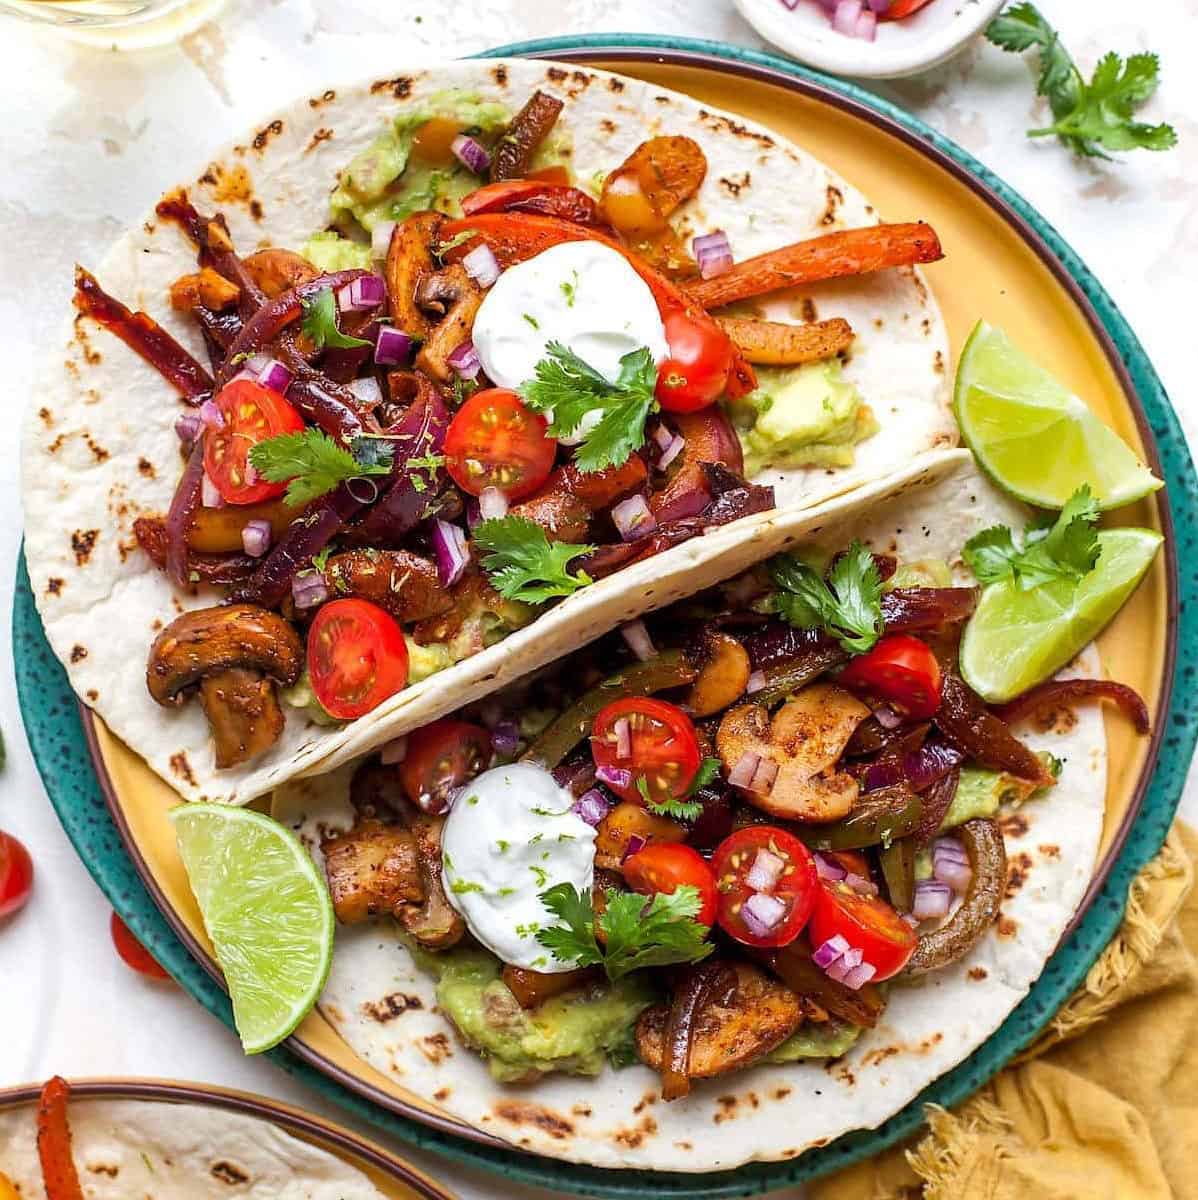  These fajitas are perfect for a weeknight meal or a weekend gathering with friends